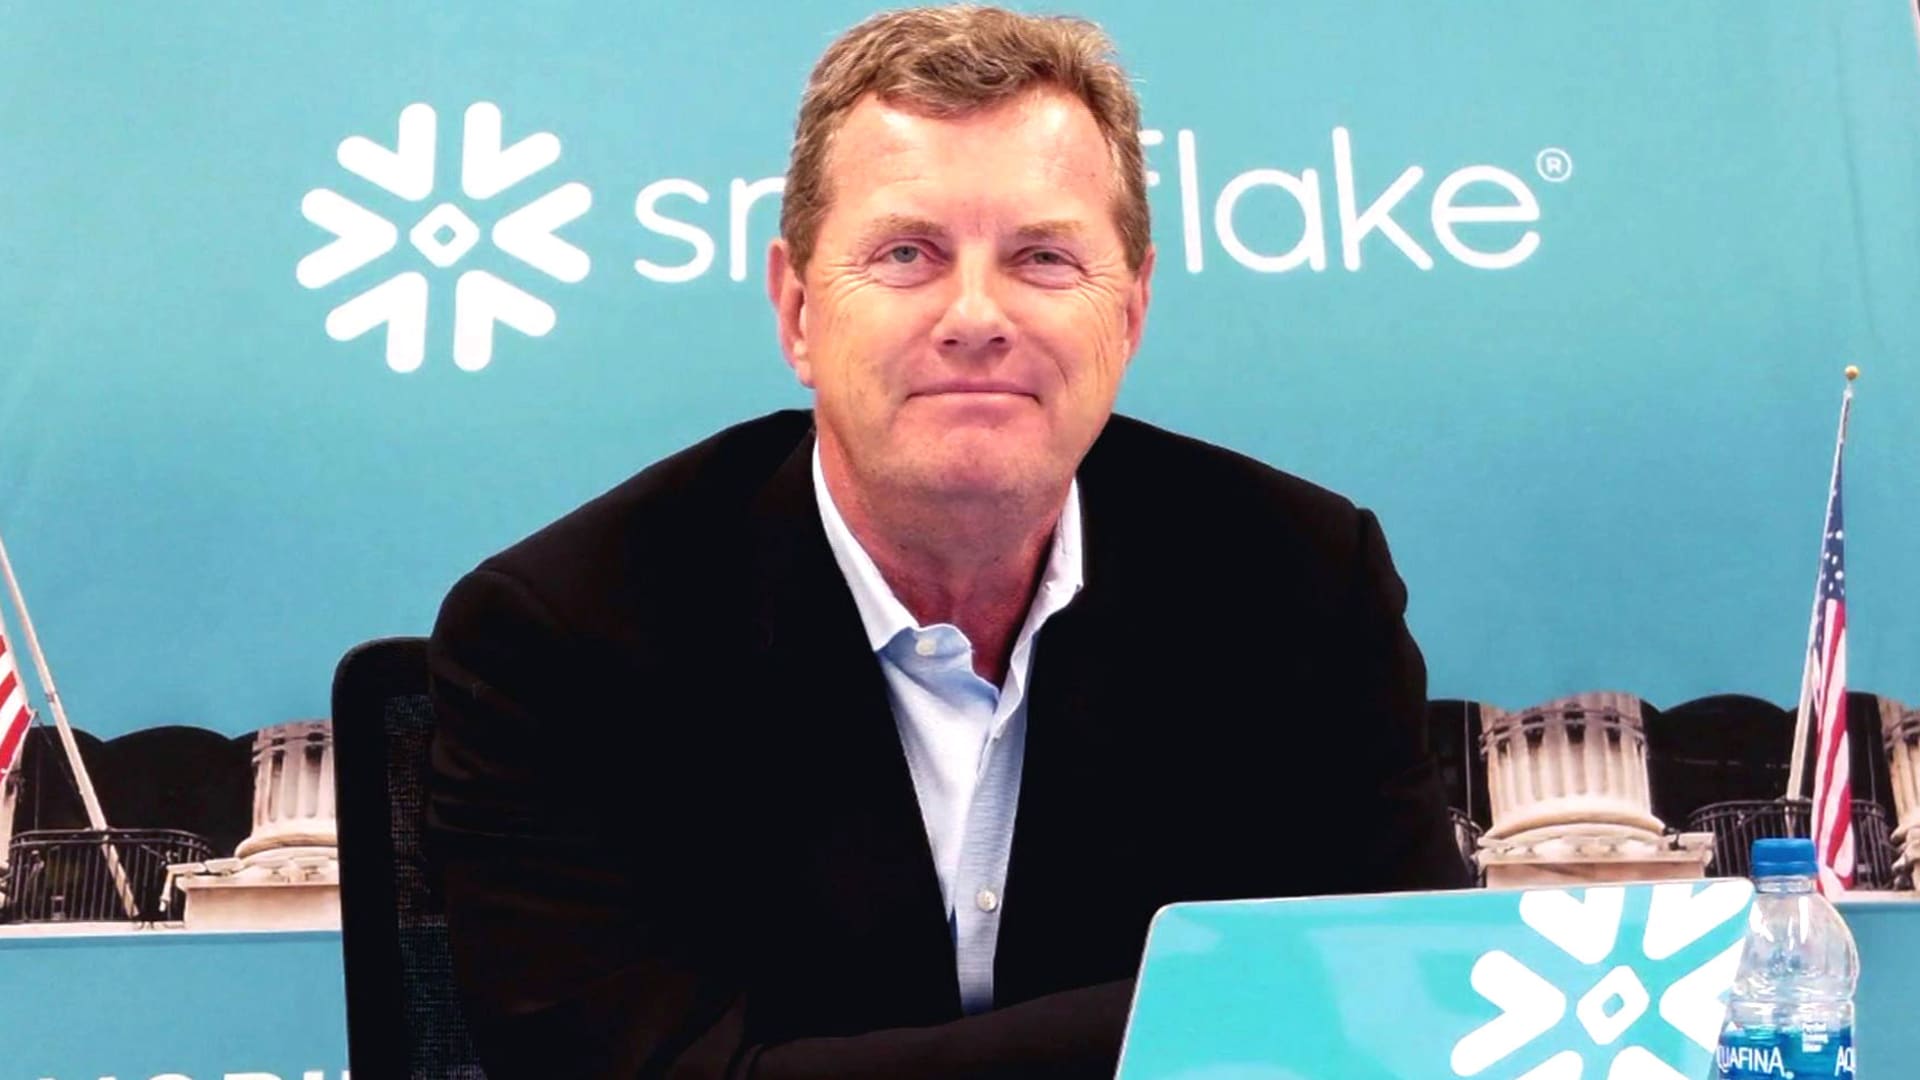 Snowflake CEO Frank Slootman Steps Down: Stock Plunges